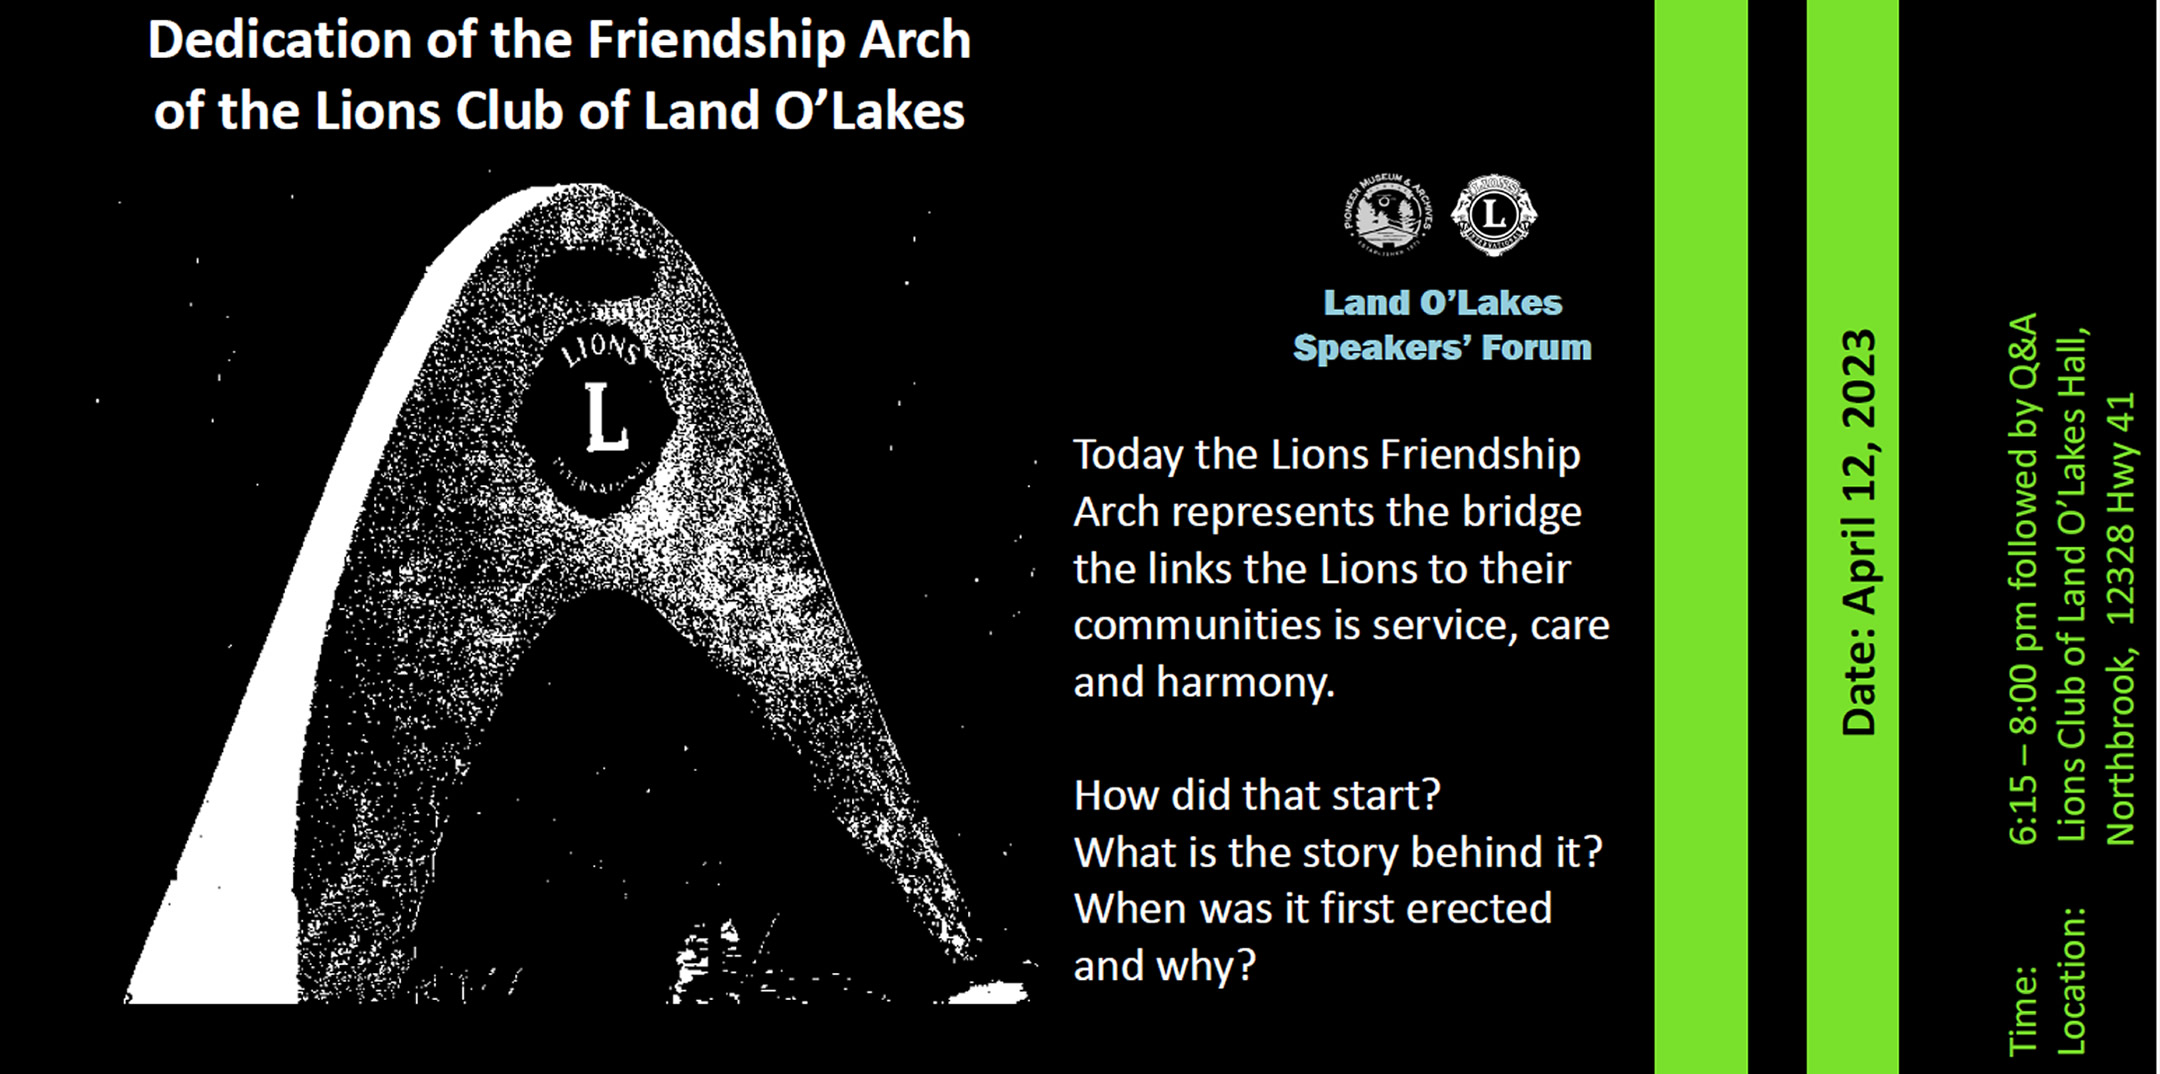 Land O' Lakes Speakers' Forum - Friendship Arch